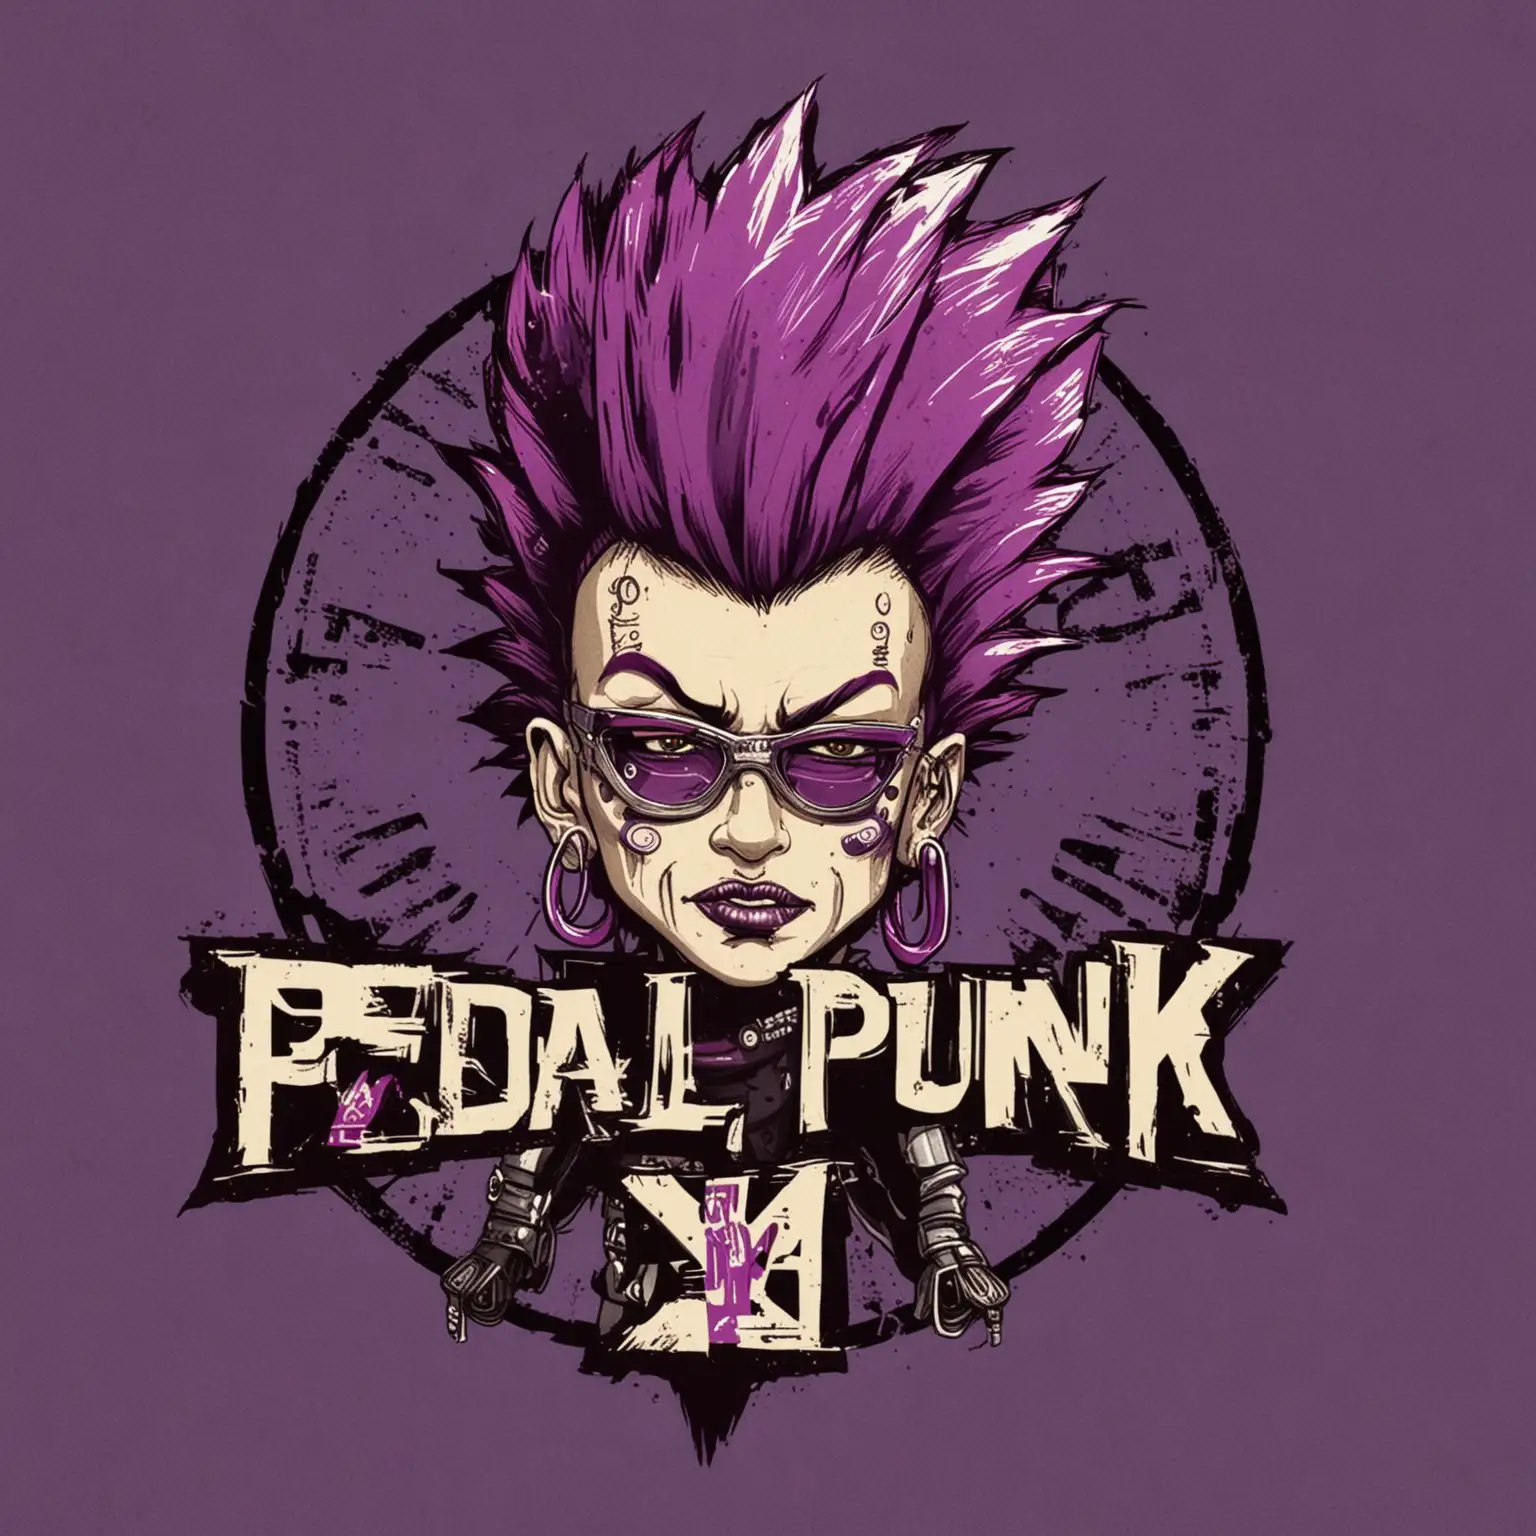 Pedal punk logo with letter”P” wearing purple Mohawk 